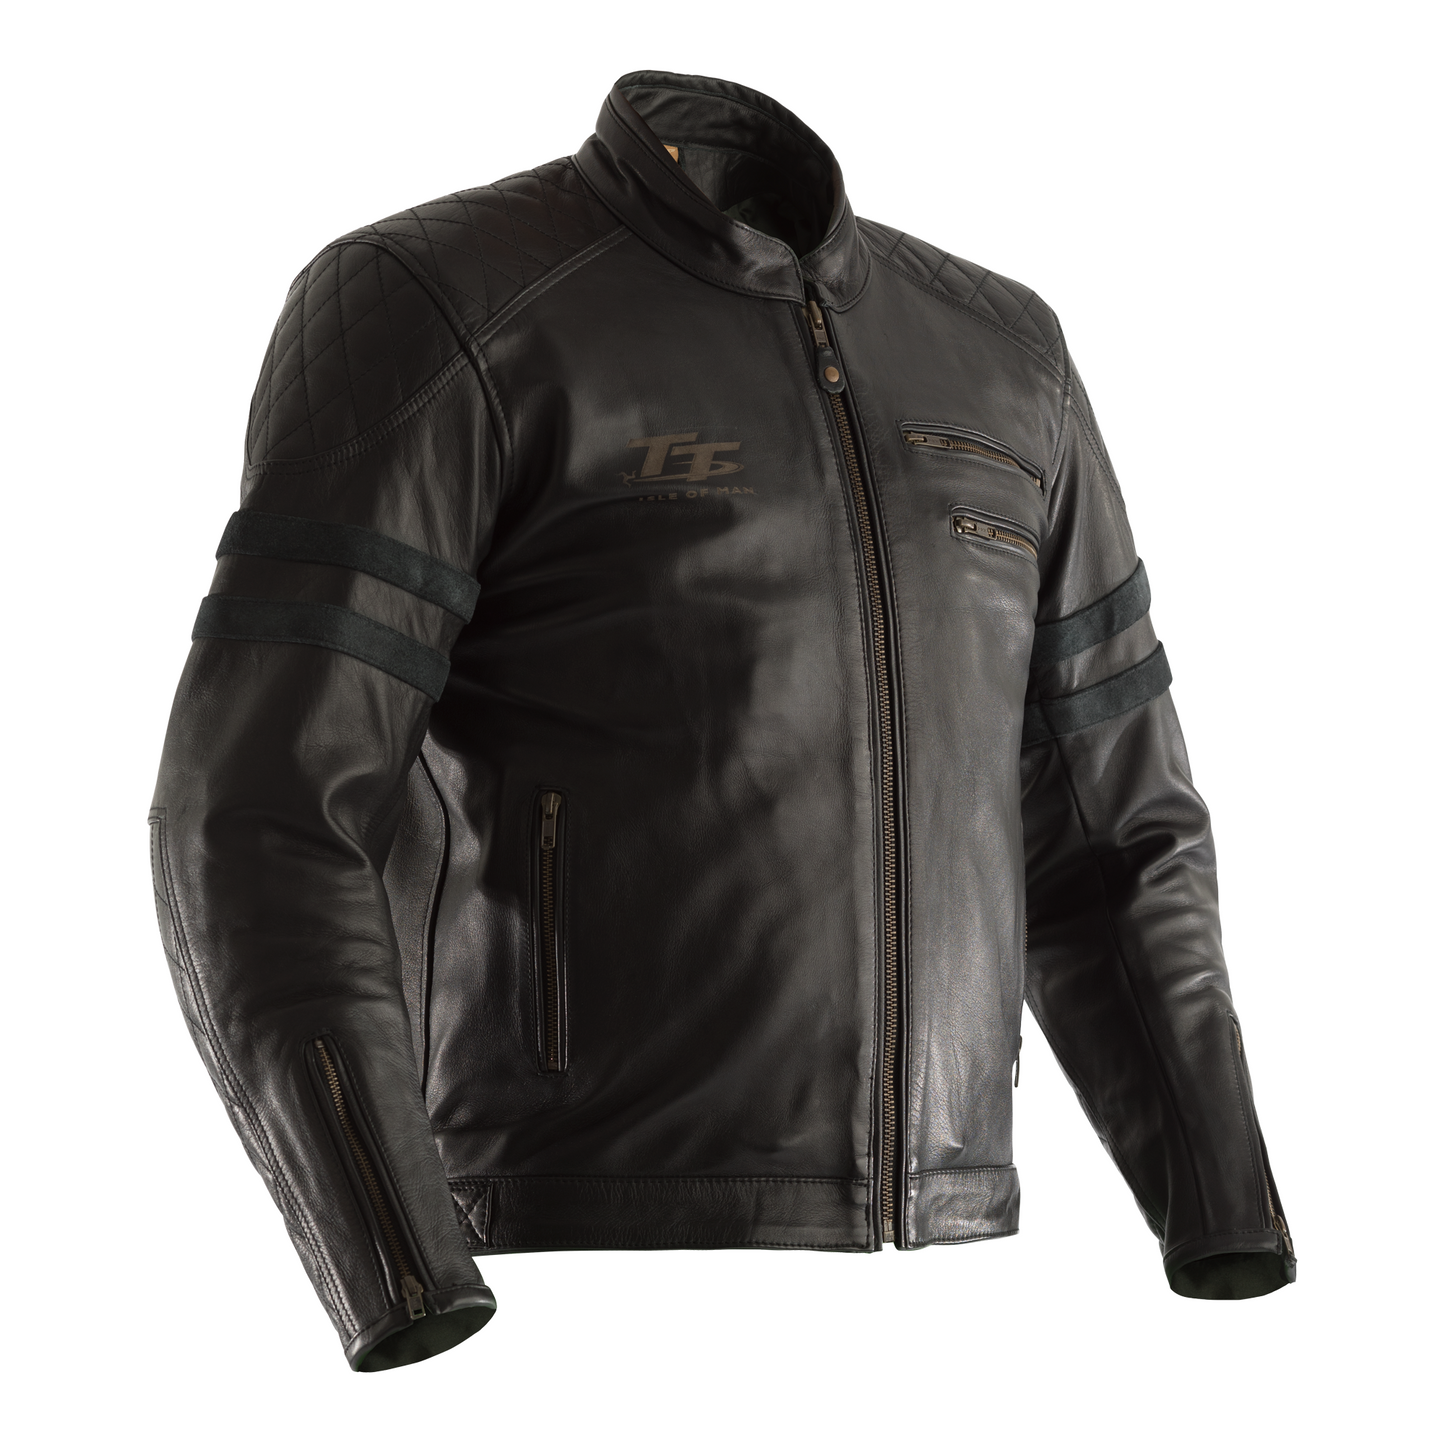 RST IOM TT Hillberry Leather Riding Jacket - CE APPROVED - Black